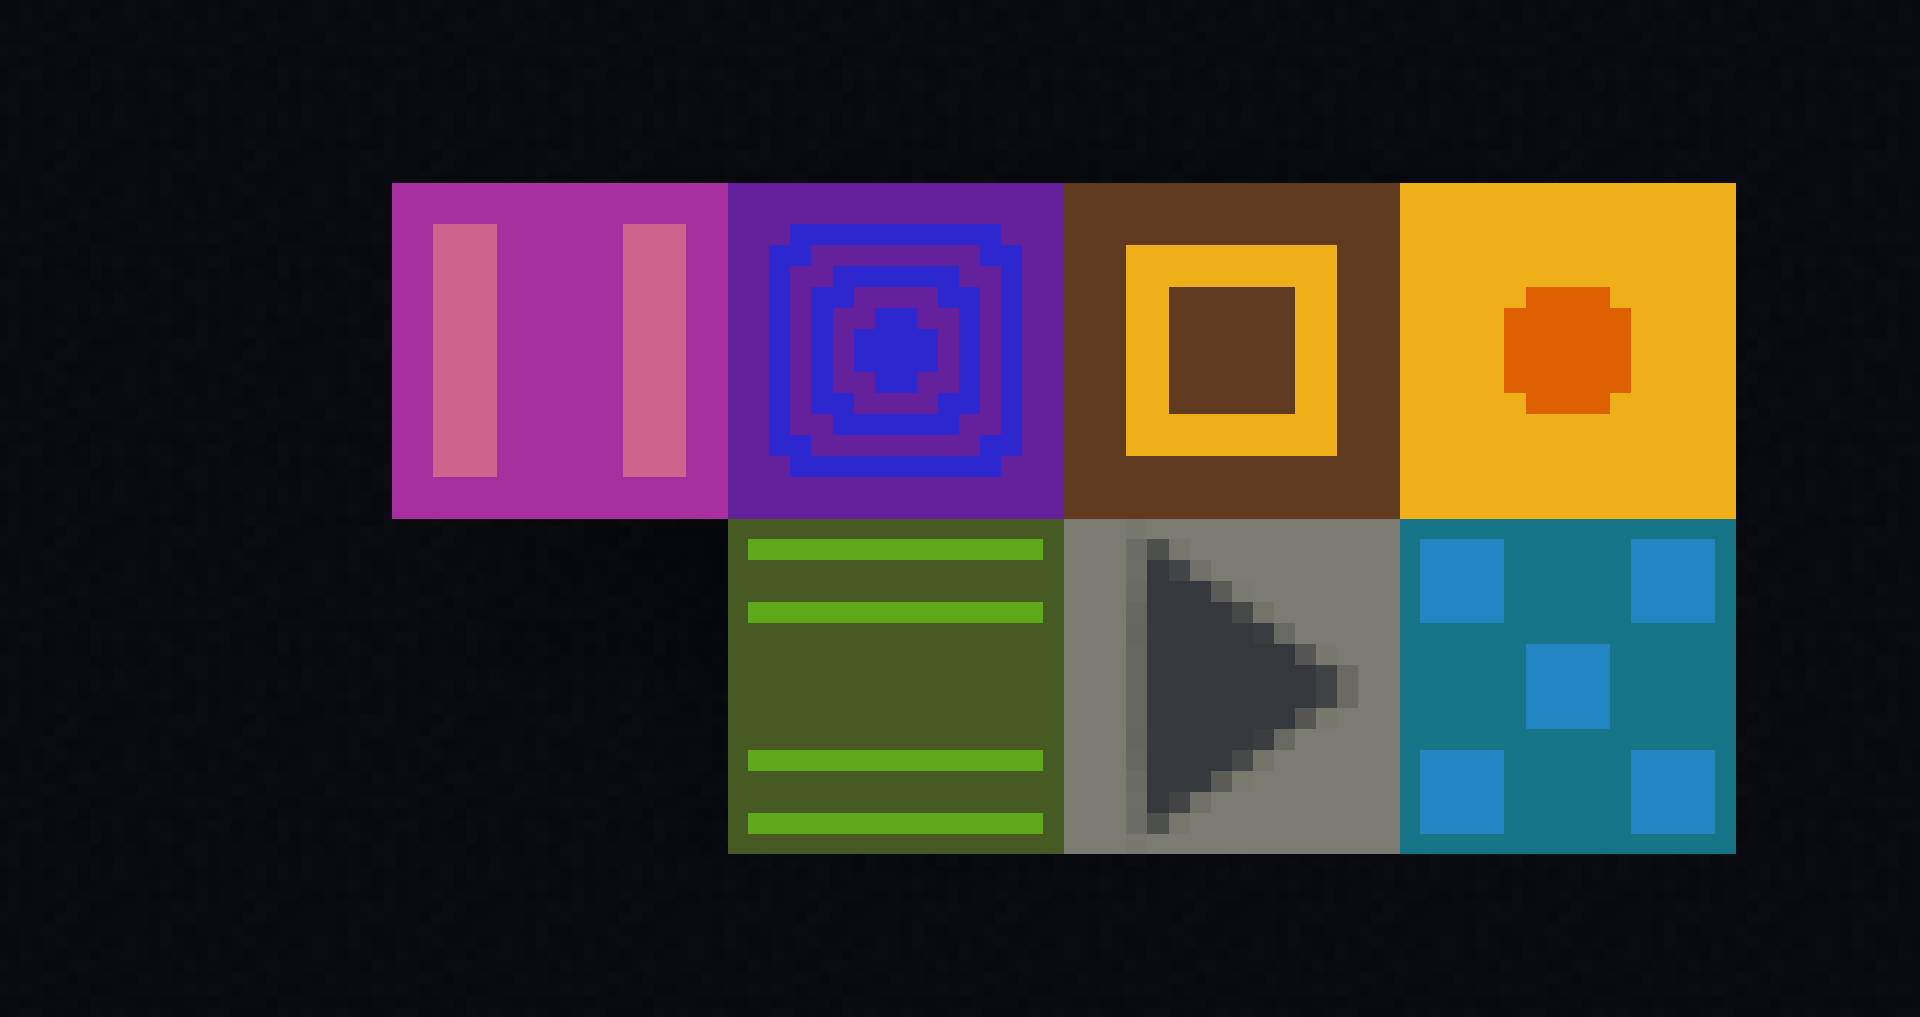 These blocks are changed